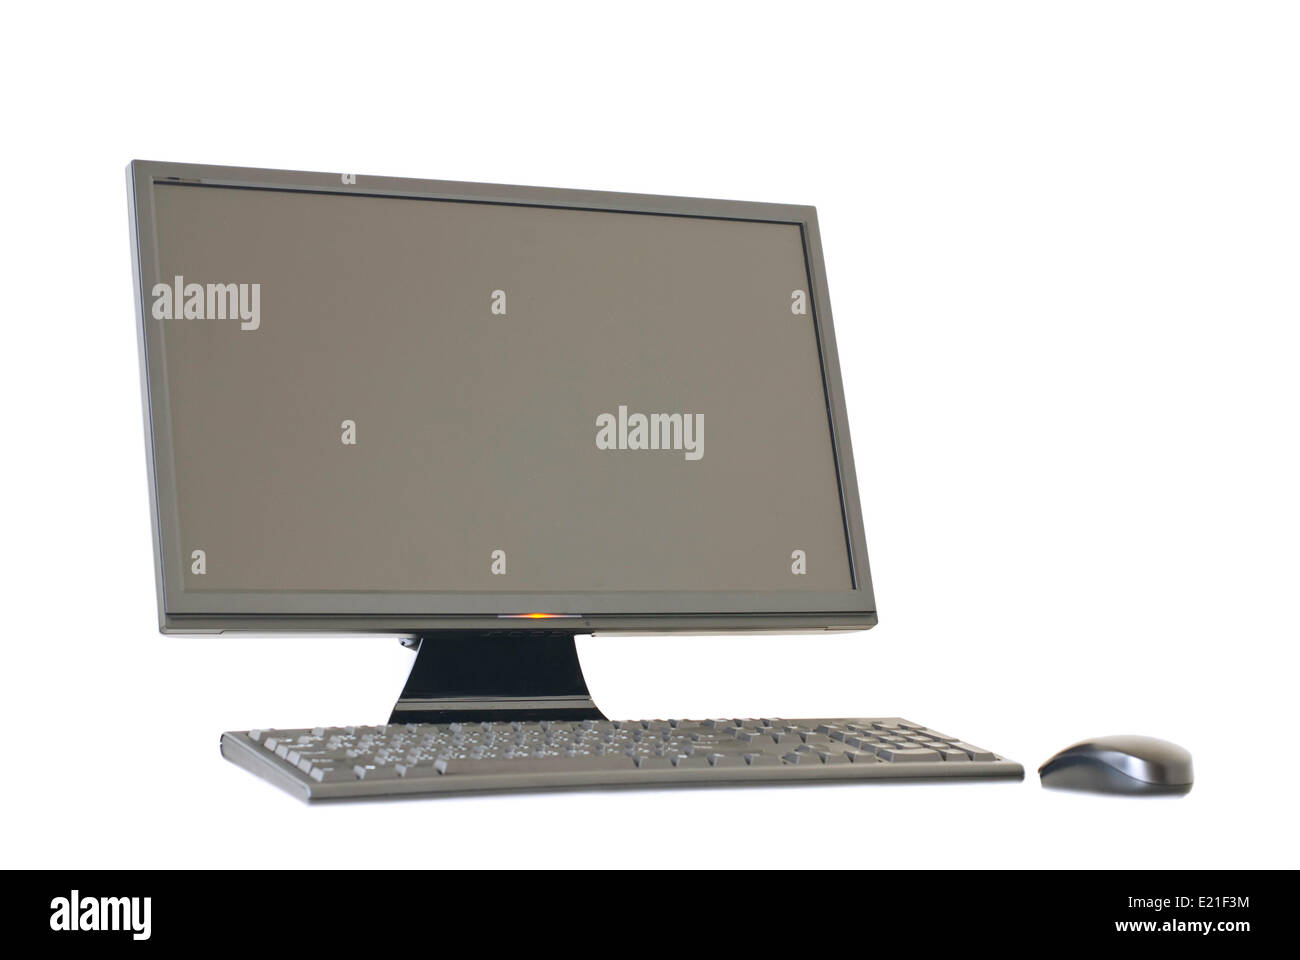 Isolated computer monitor, keyboard and mouse Stock Photo